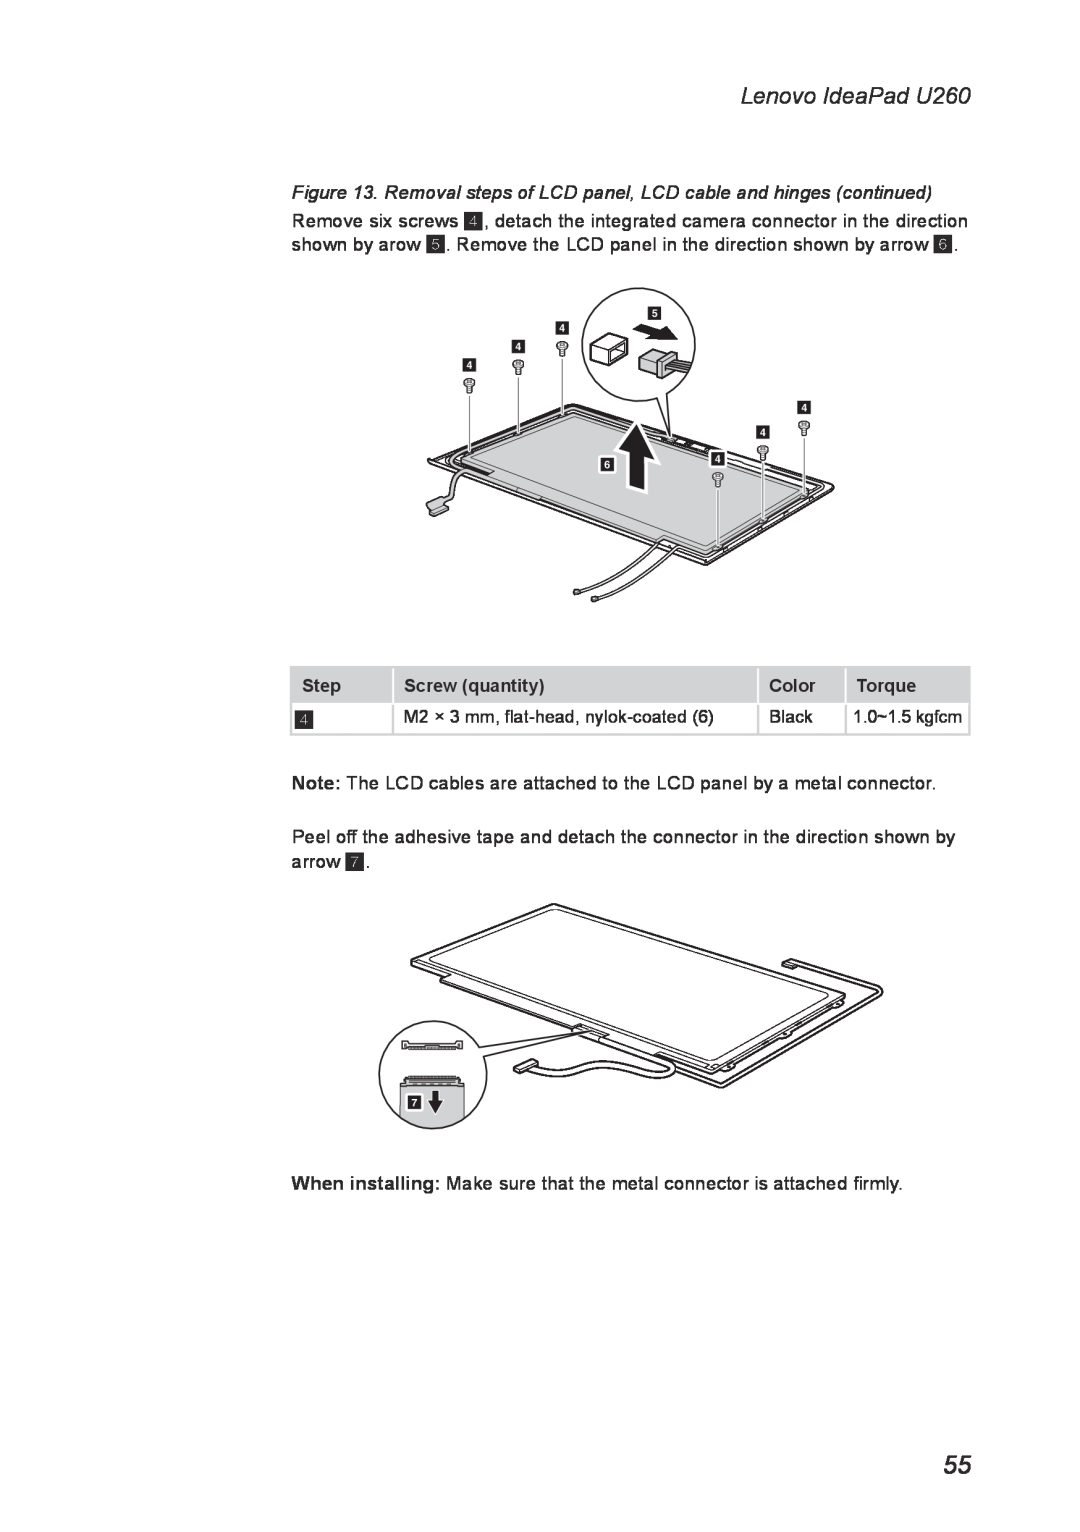 Lenovo manual Removal steps of LCD panel, LCD cable and hinges continued, Lenovo IdeaPad U260 